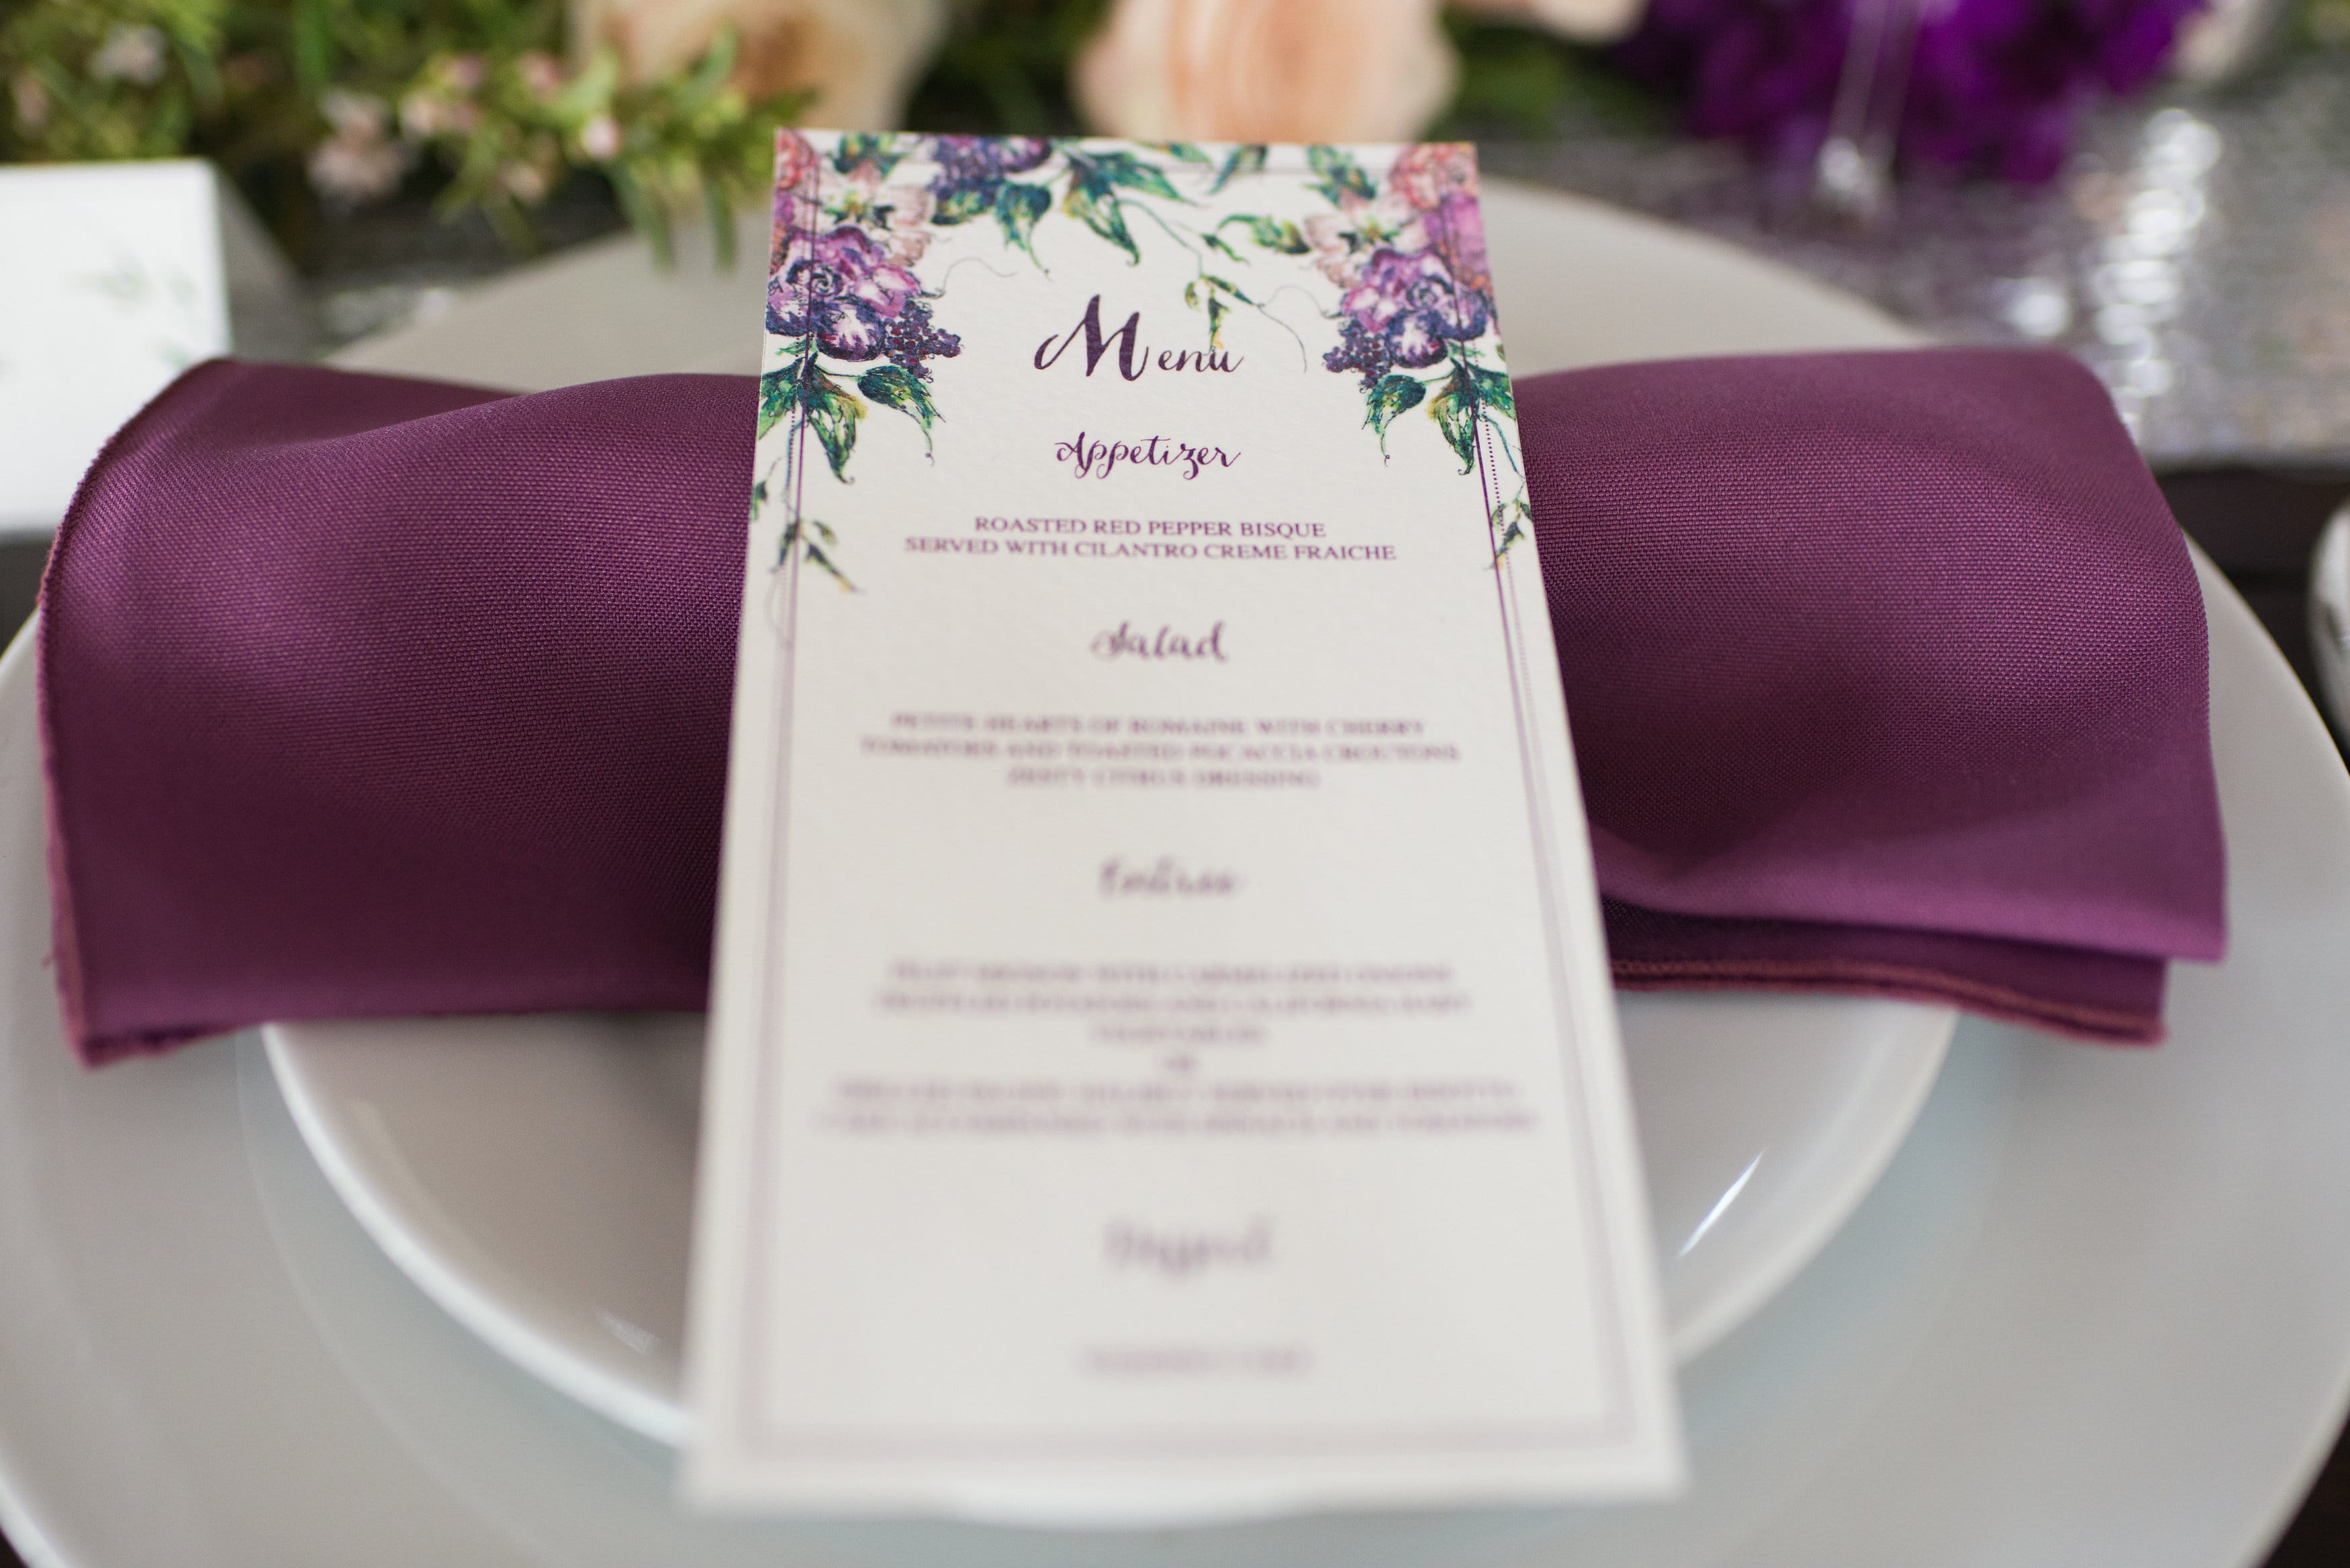 Purple Winter Wedding with Vintage Details - styled photoshoot featuring Simone by Sottero and Midgley